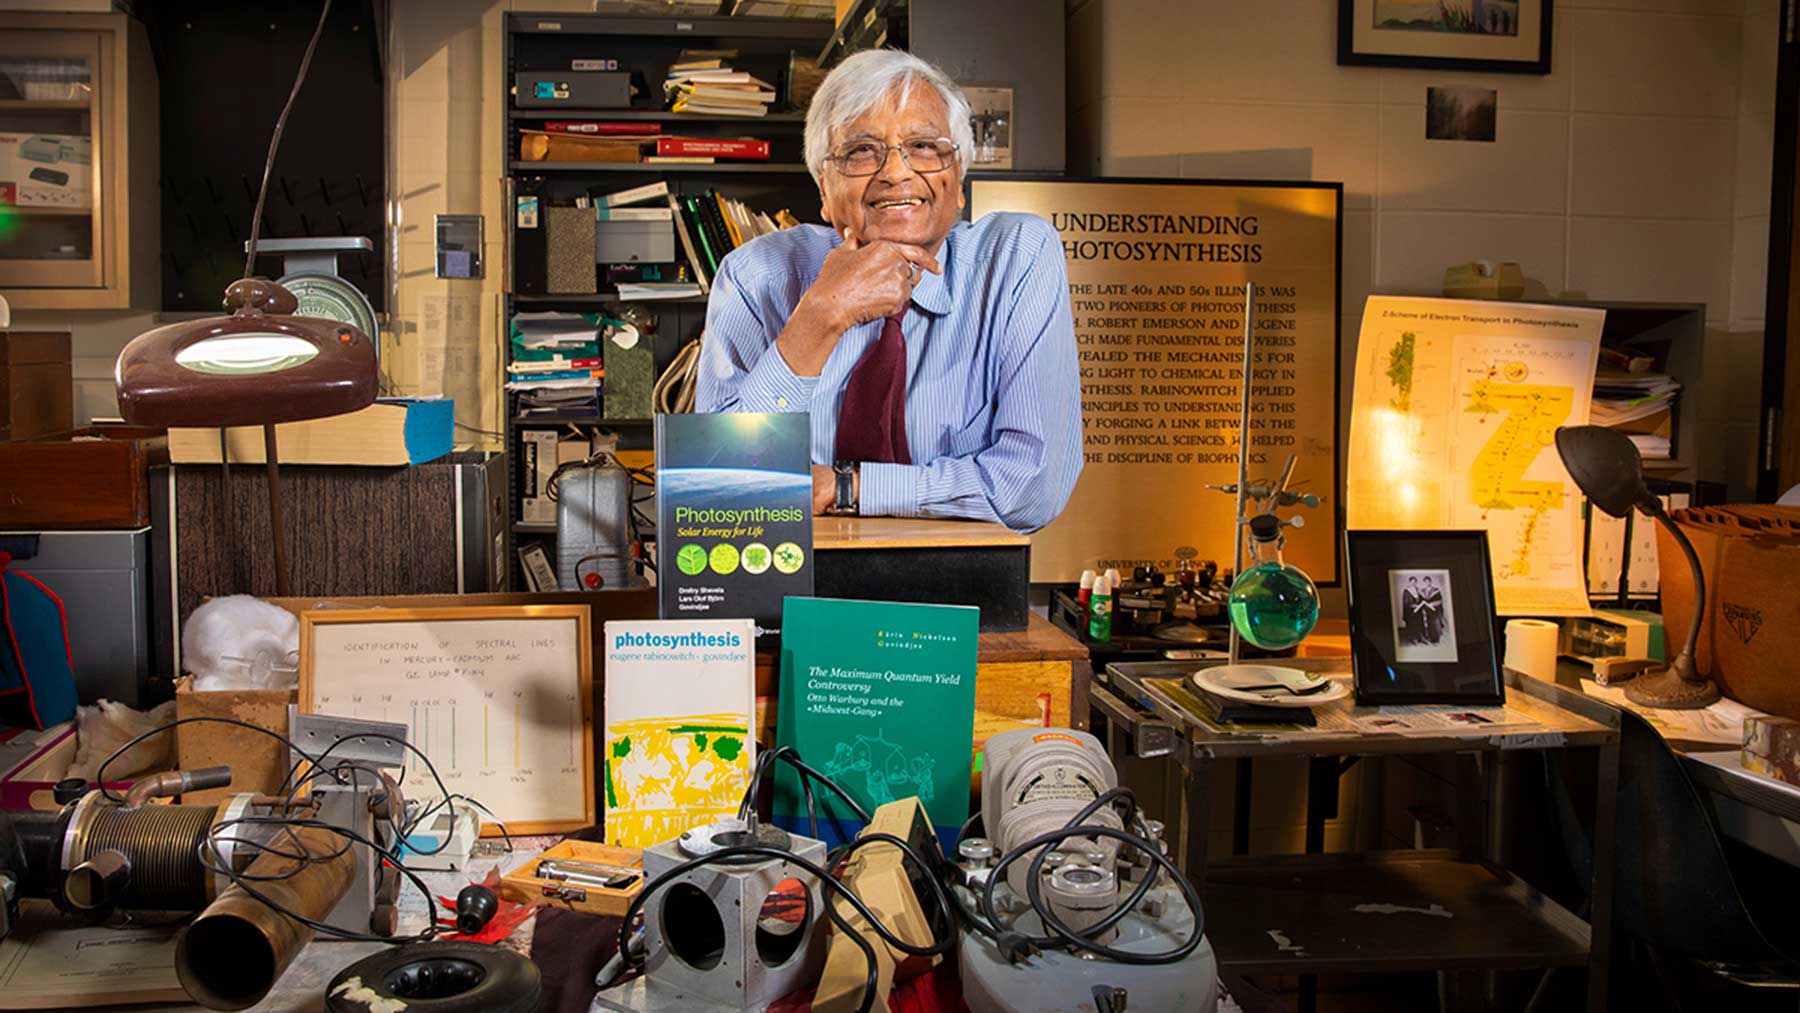 Professor Govindjee in his office, surrounded by memorabilia from decades of studying photosynthesis